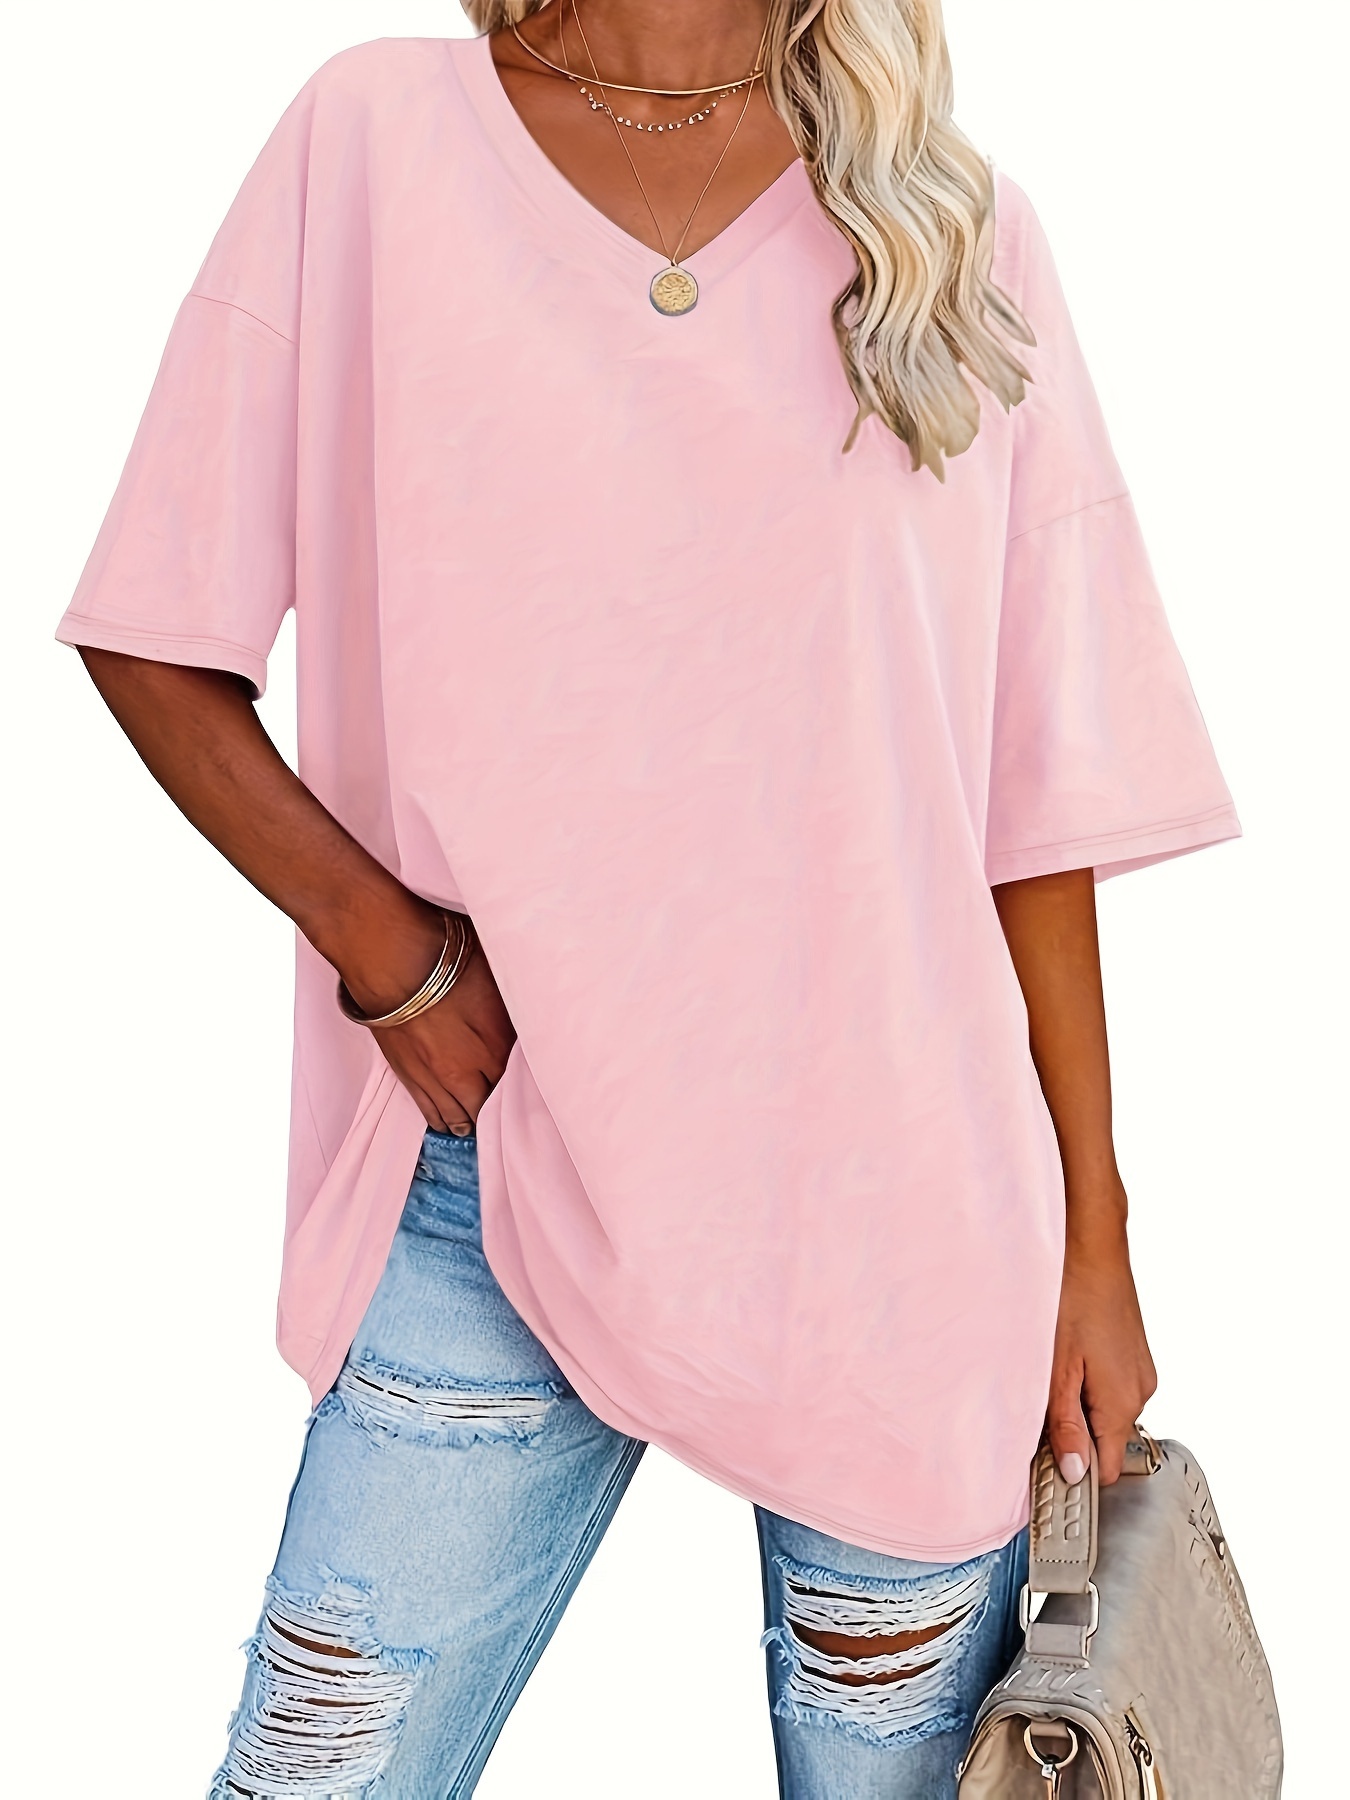 hoksml Womens Tops, Summer Clearance Women's Casual T-Shirt Plus-Size Solid  O-Neck Tees Top Loose Short Sleeve T-shirt Pullover Tops